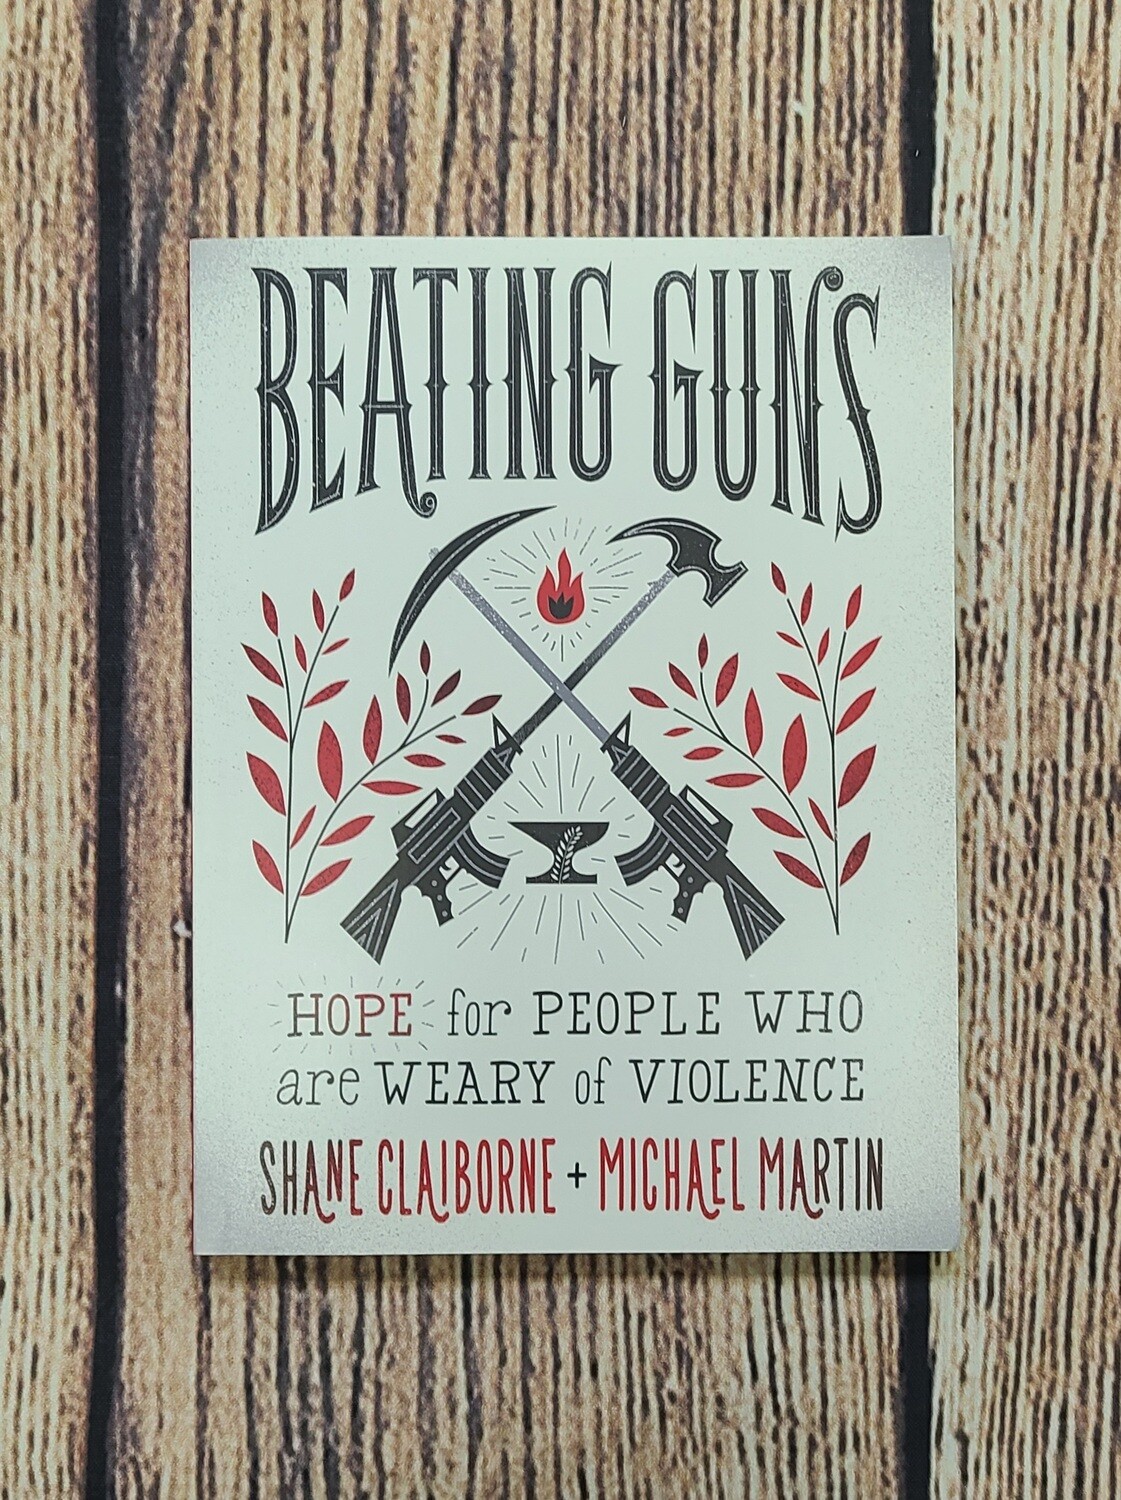 Beating Guns: Hope for People who are Weary of Violence by Shane Claiborne and Michael Martin